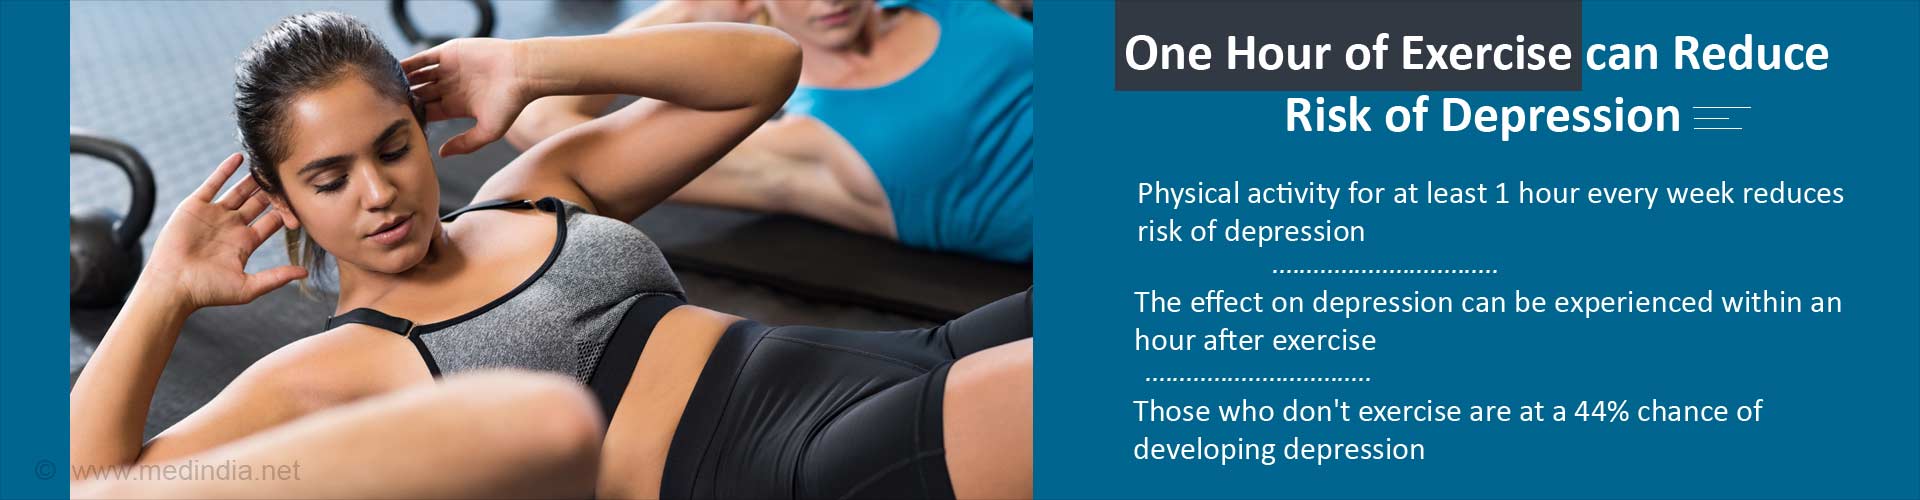 One hour of exercise can reduce risk of depression 
- Physical activity for at least i hour every week reduces risk of depression
- The effect on depression can be experienced within an hour after exercise
- Those who don''t exercise are at a 44% chance of developing depression